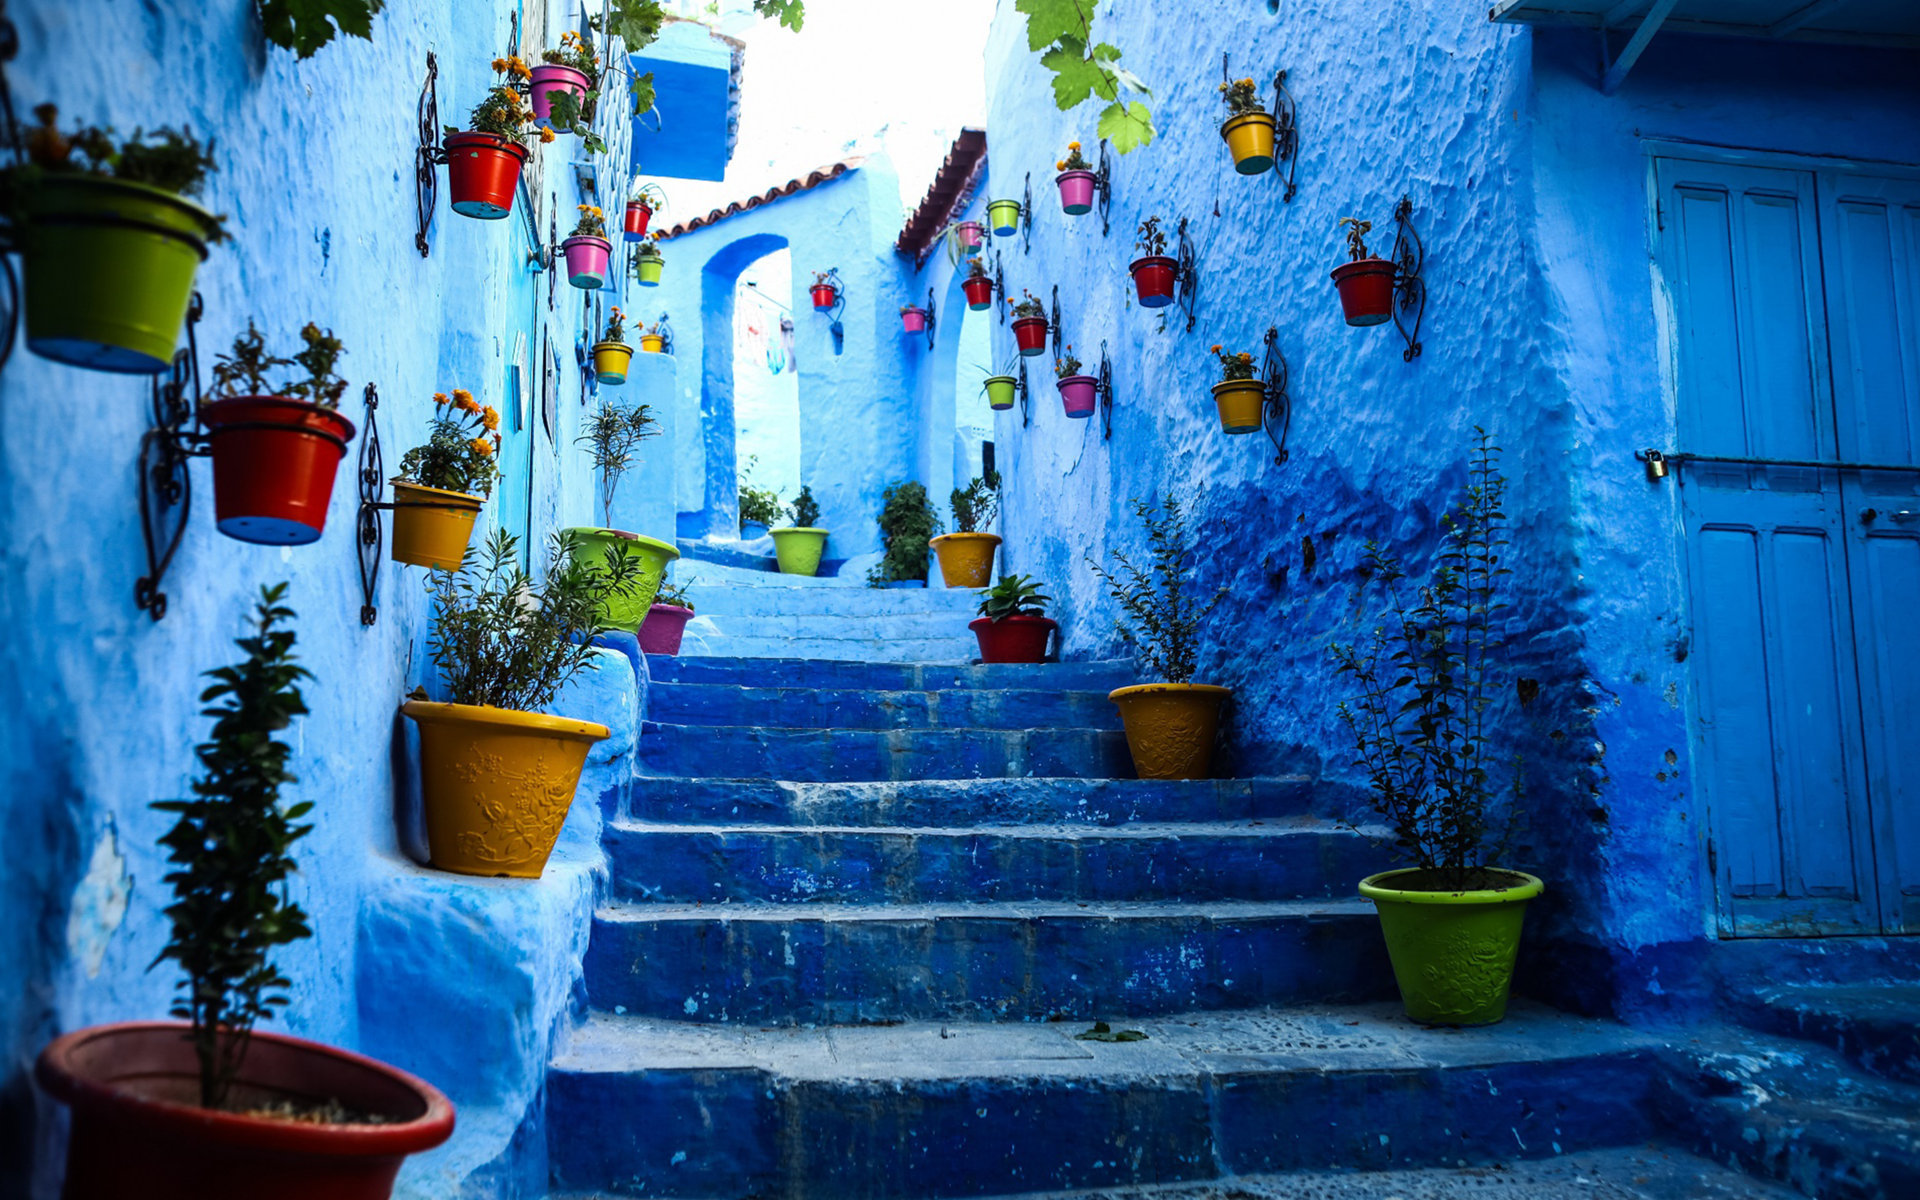 Full day trip from Fes to Chefchaouen